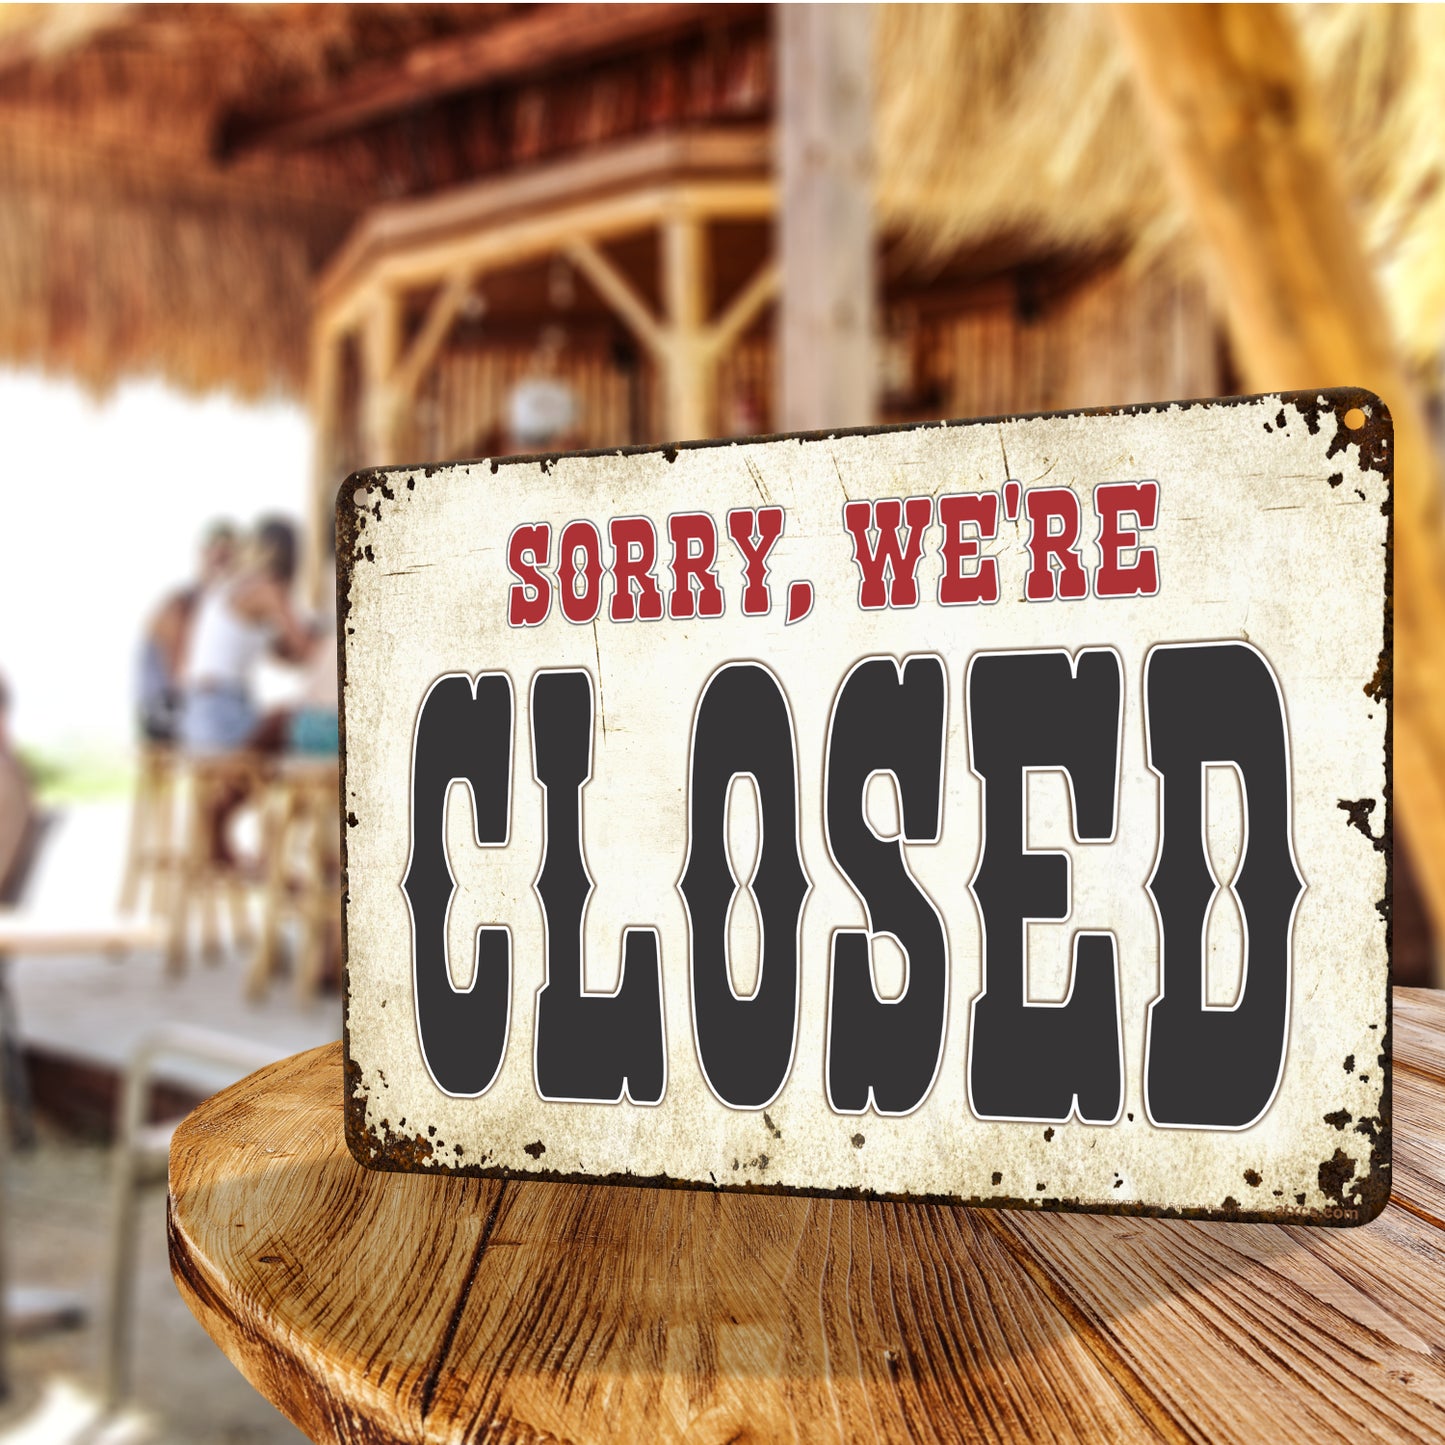 ATX CUSTOM SIGNS - Come on in, we're Open, Sorry we're Closed Double Sided Sign - Open Closed Tan Rusted Metal Sign